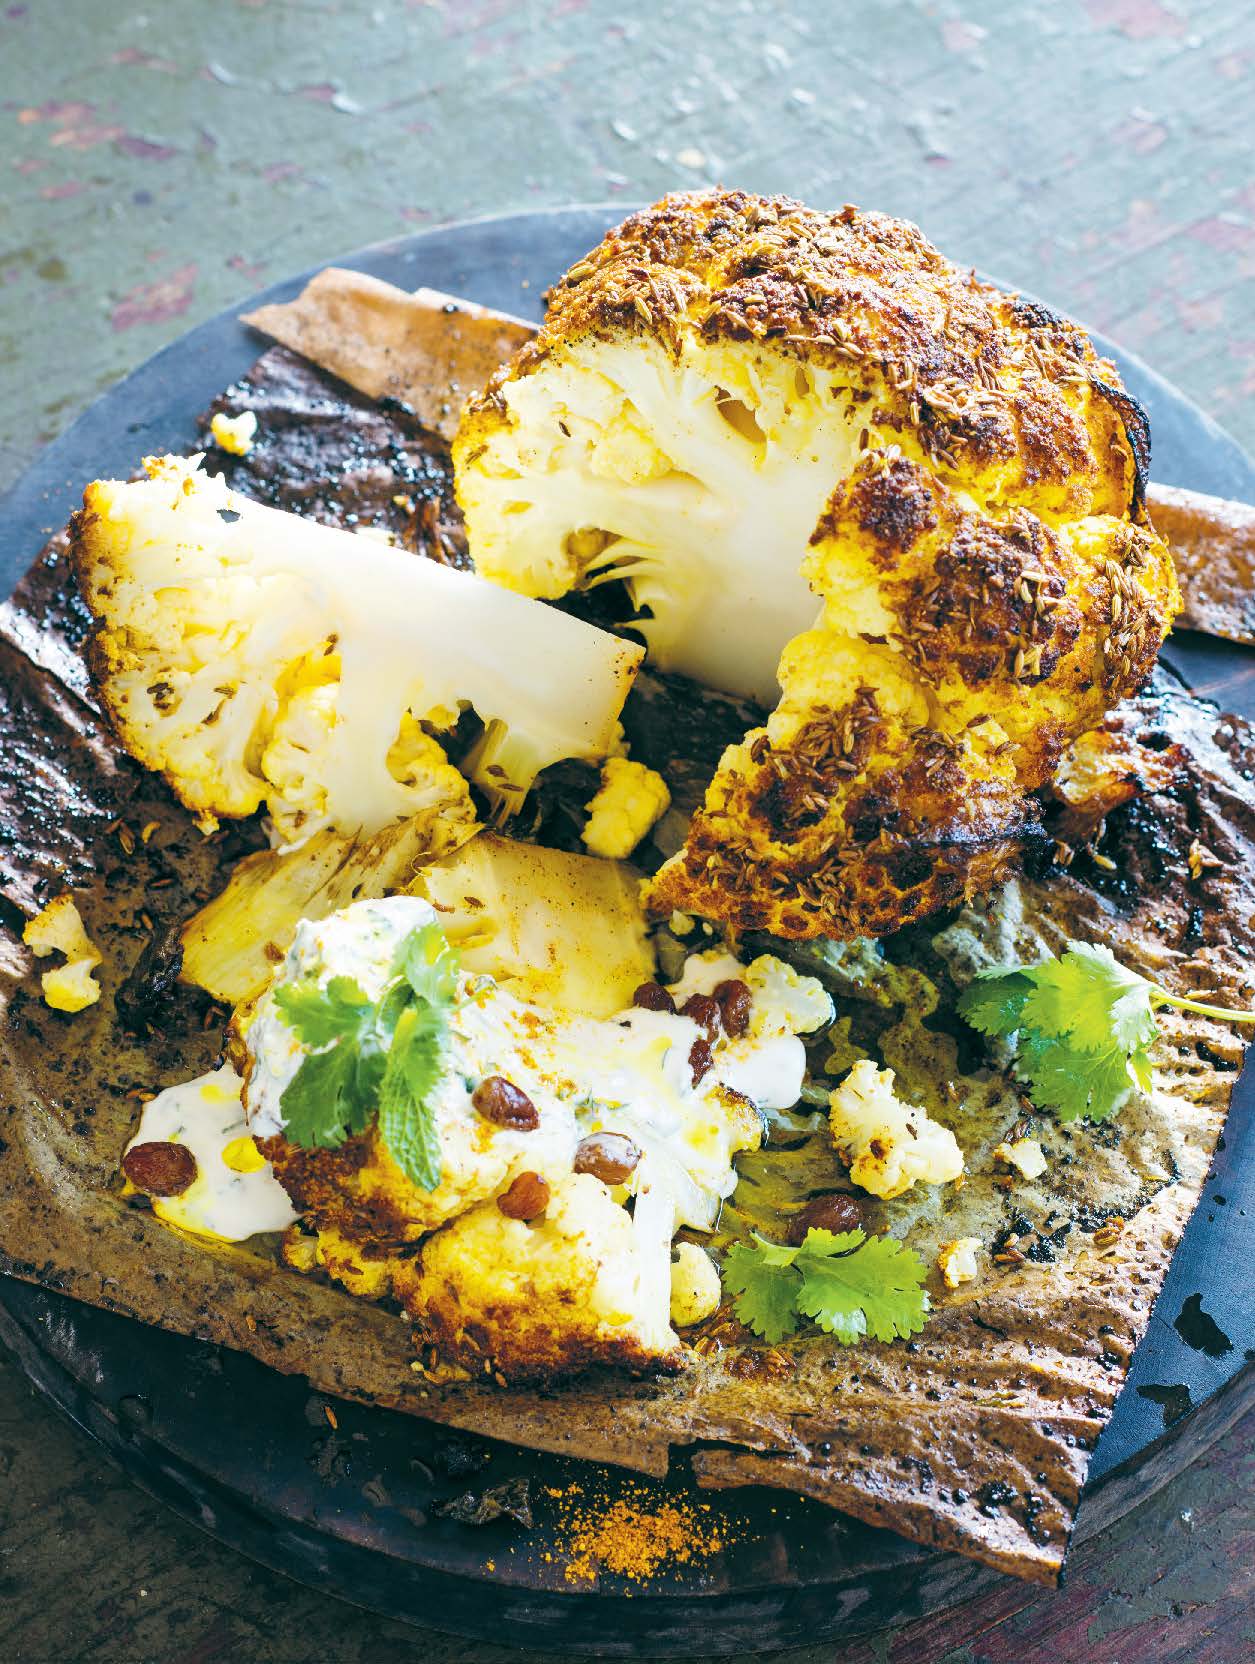 Baked whole cauliflower with Indian spices, mint and yoghurt